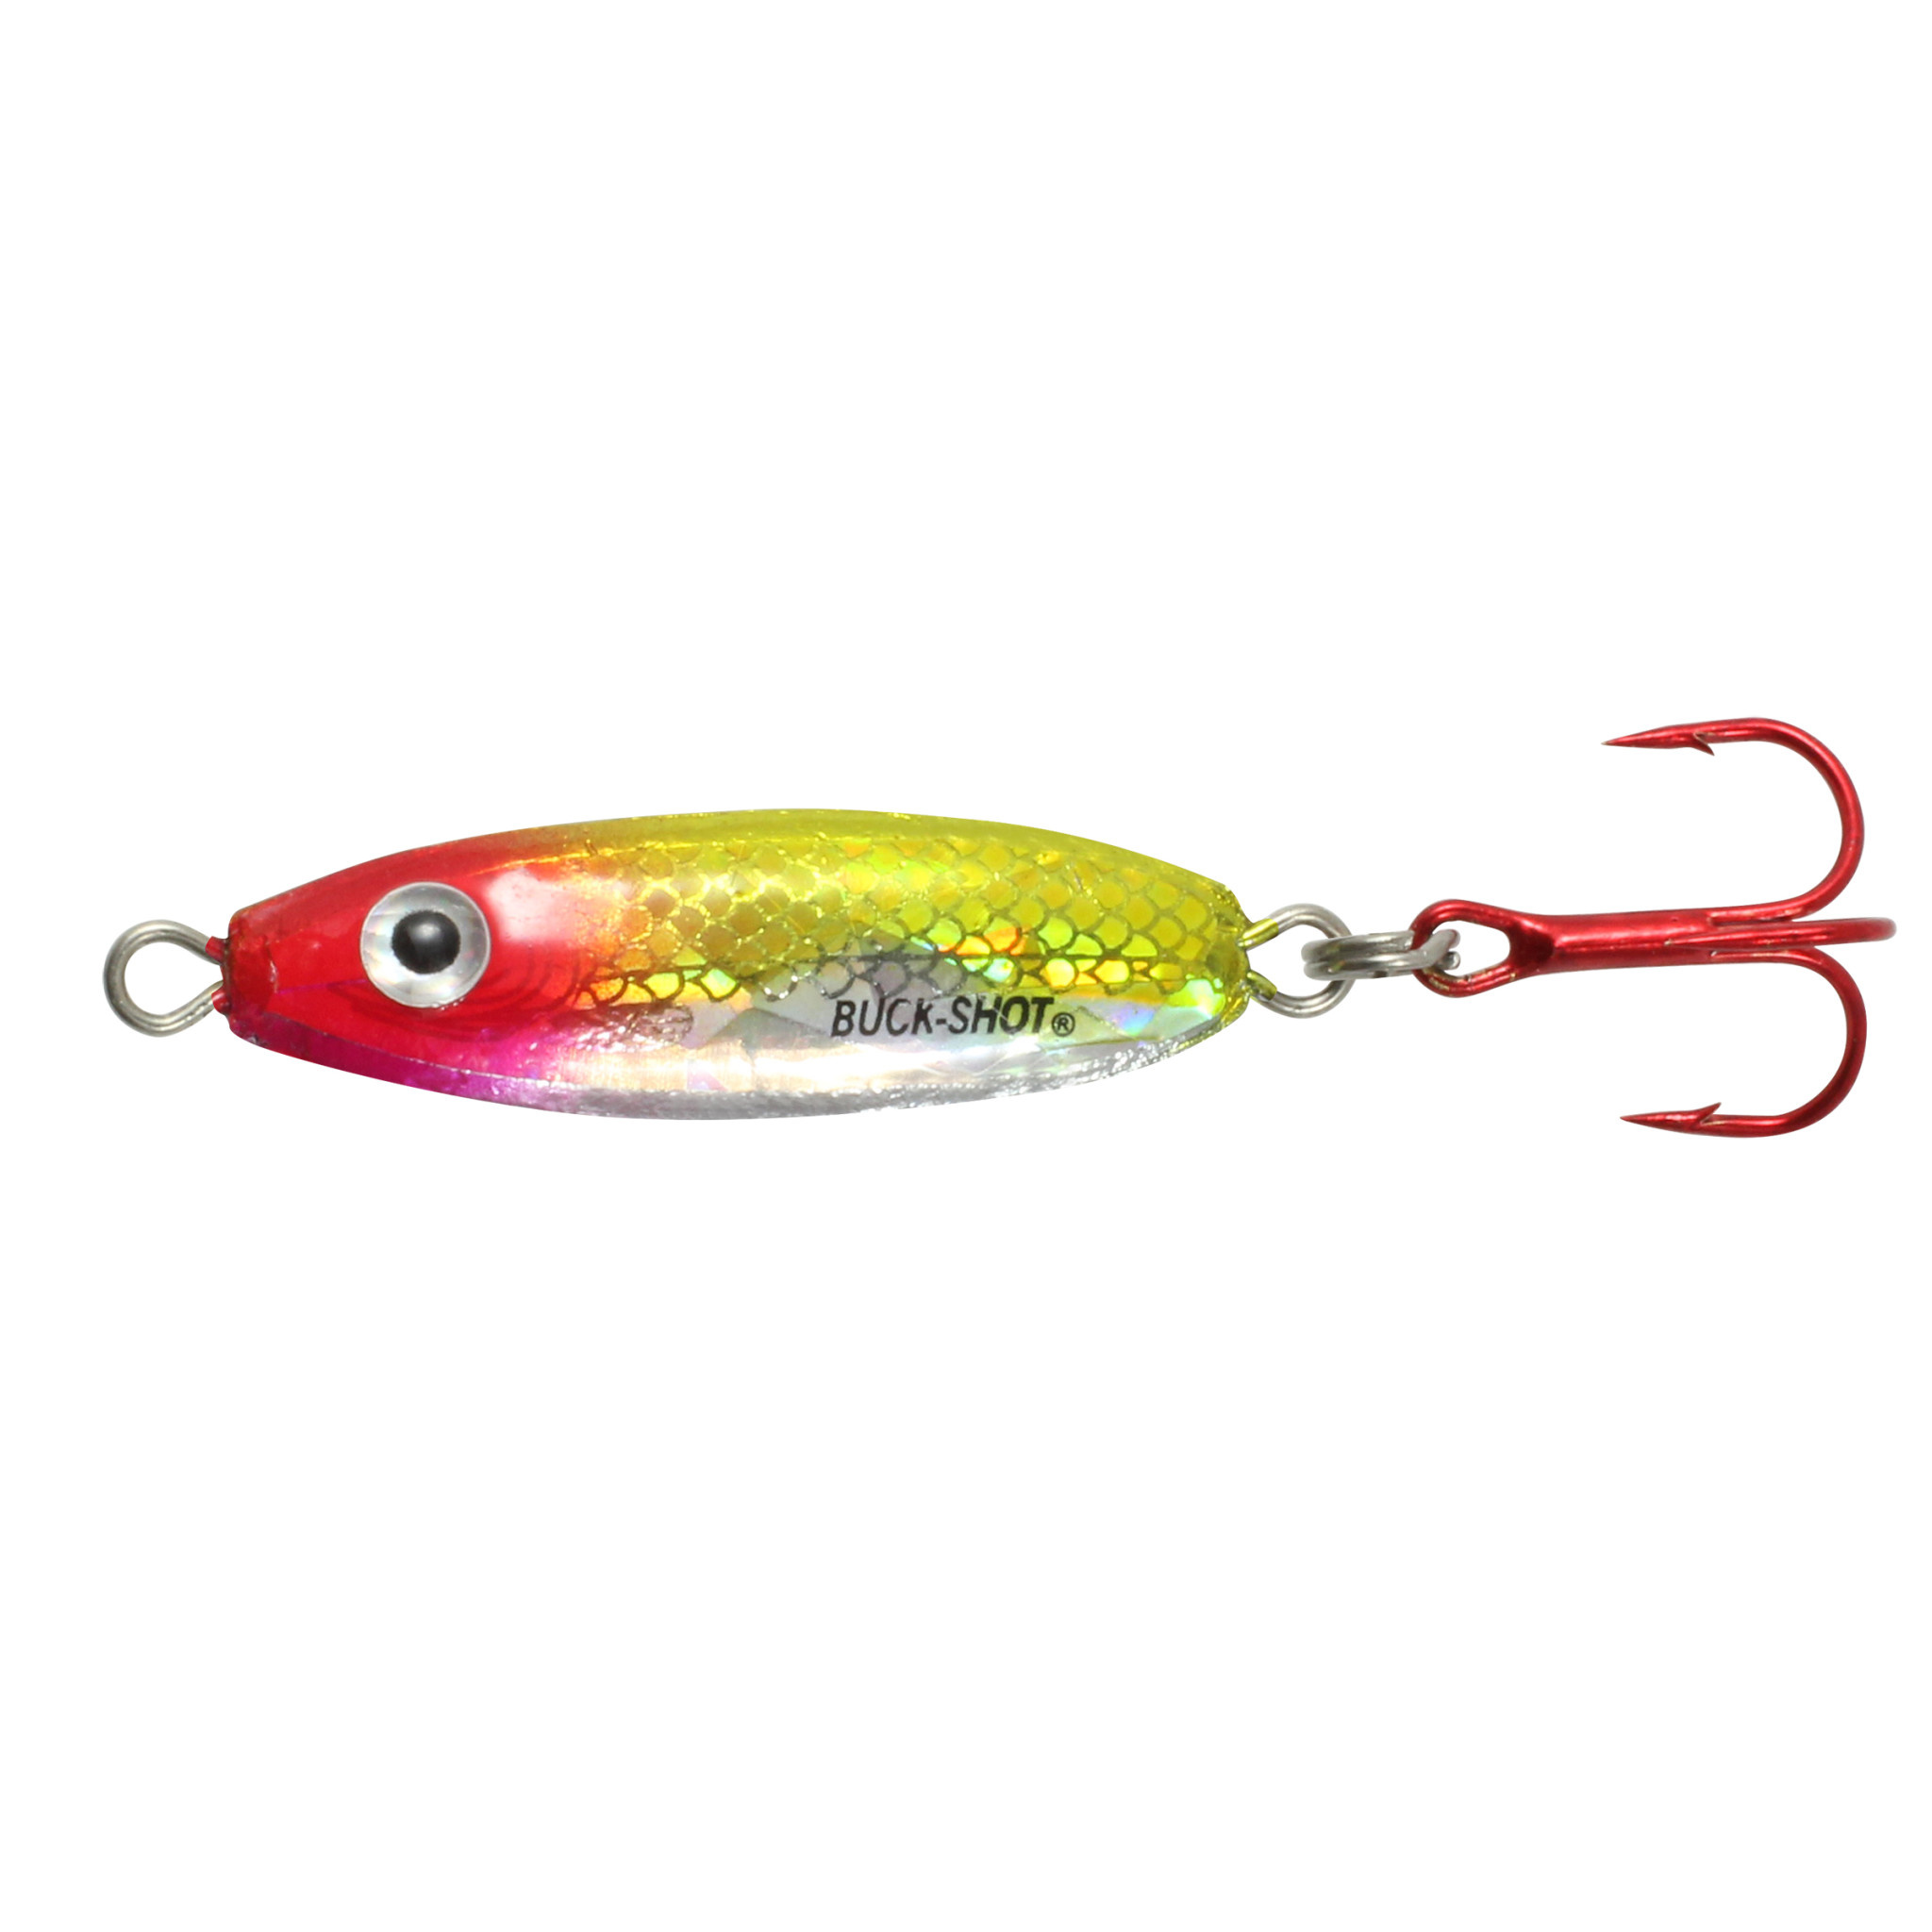 Northland Buckshot Rattle Spoon, 3/4 oz. - Great Lakes Outfitters